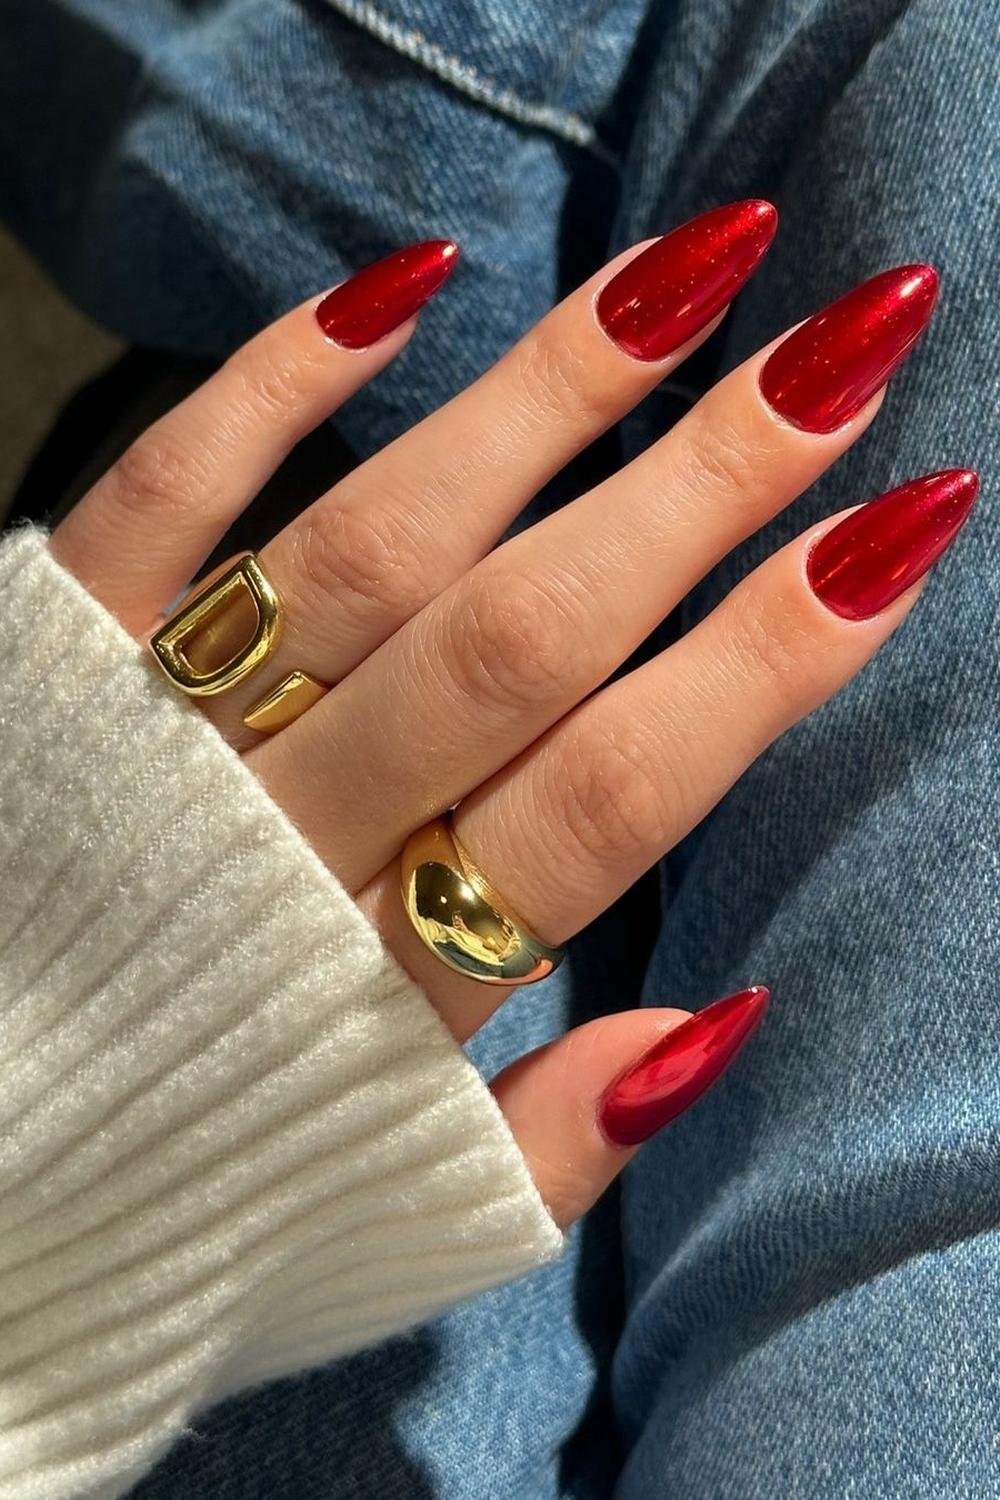 32 - Picture of Red Chrome Nails